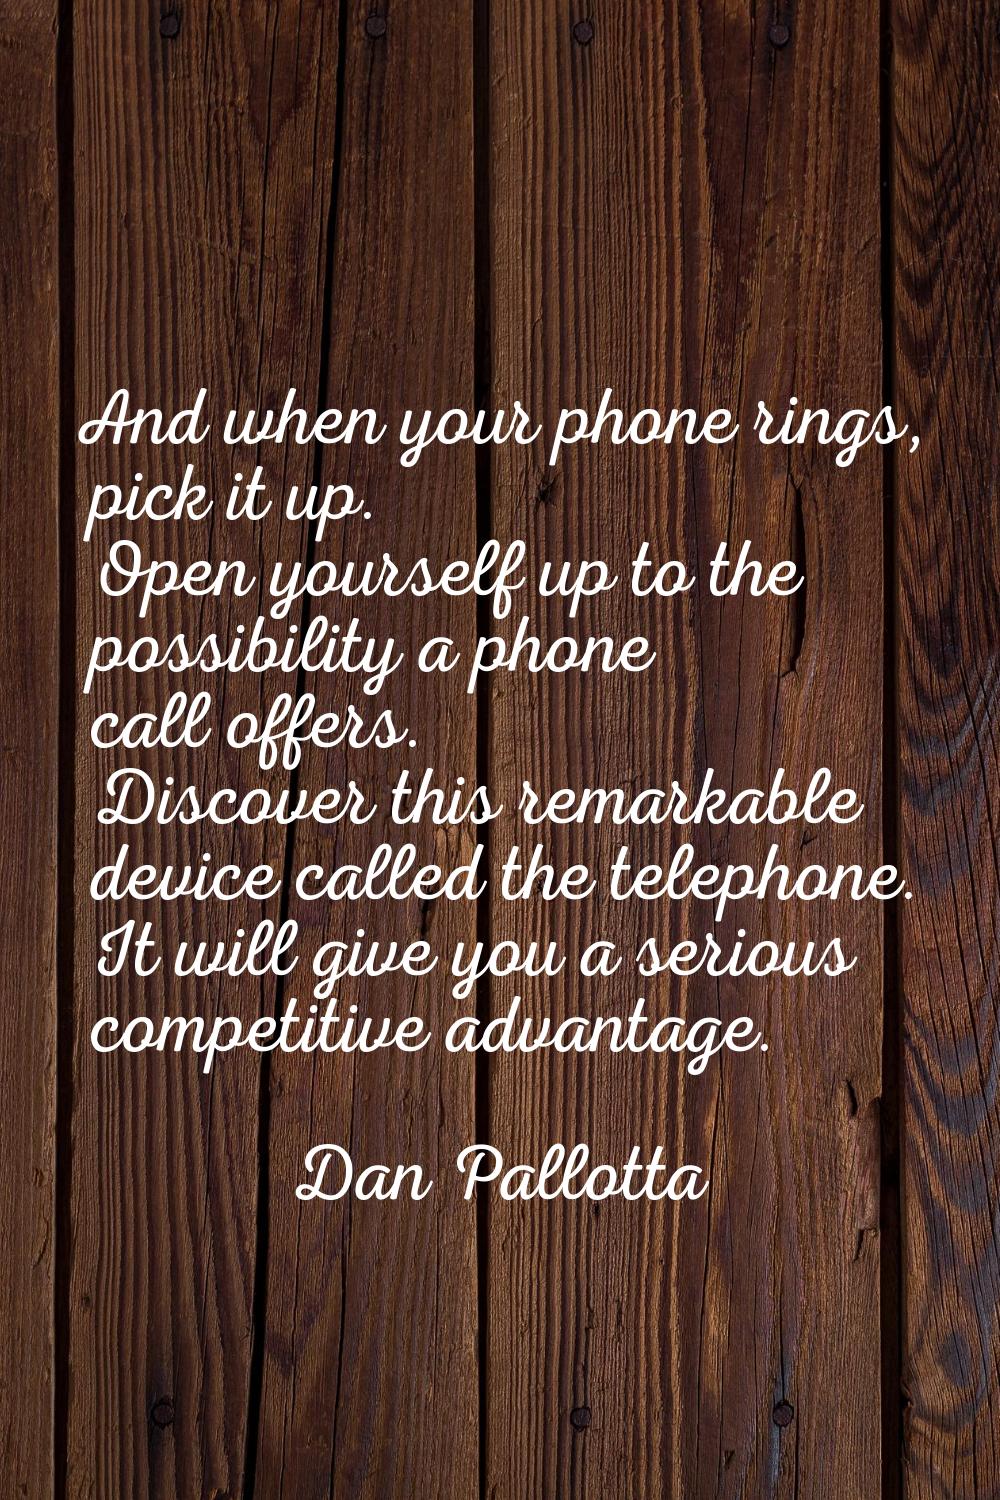 And when your phone rings, pick it up. Open yourself up to the possibility a phone call offers. Dis